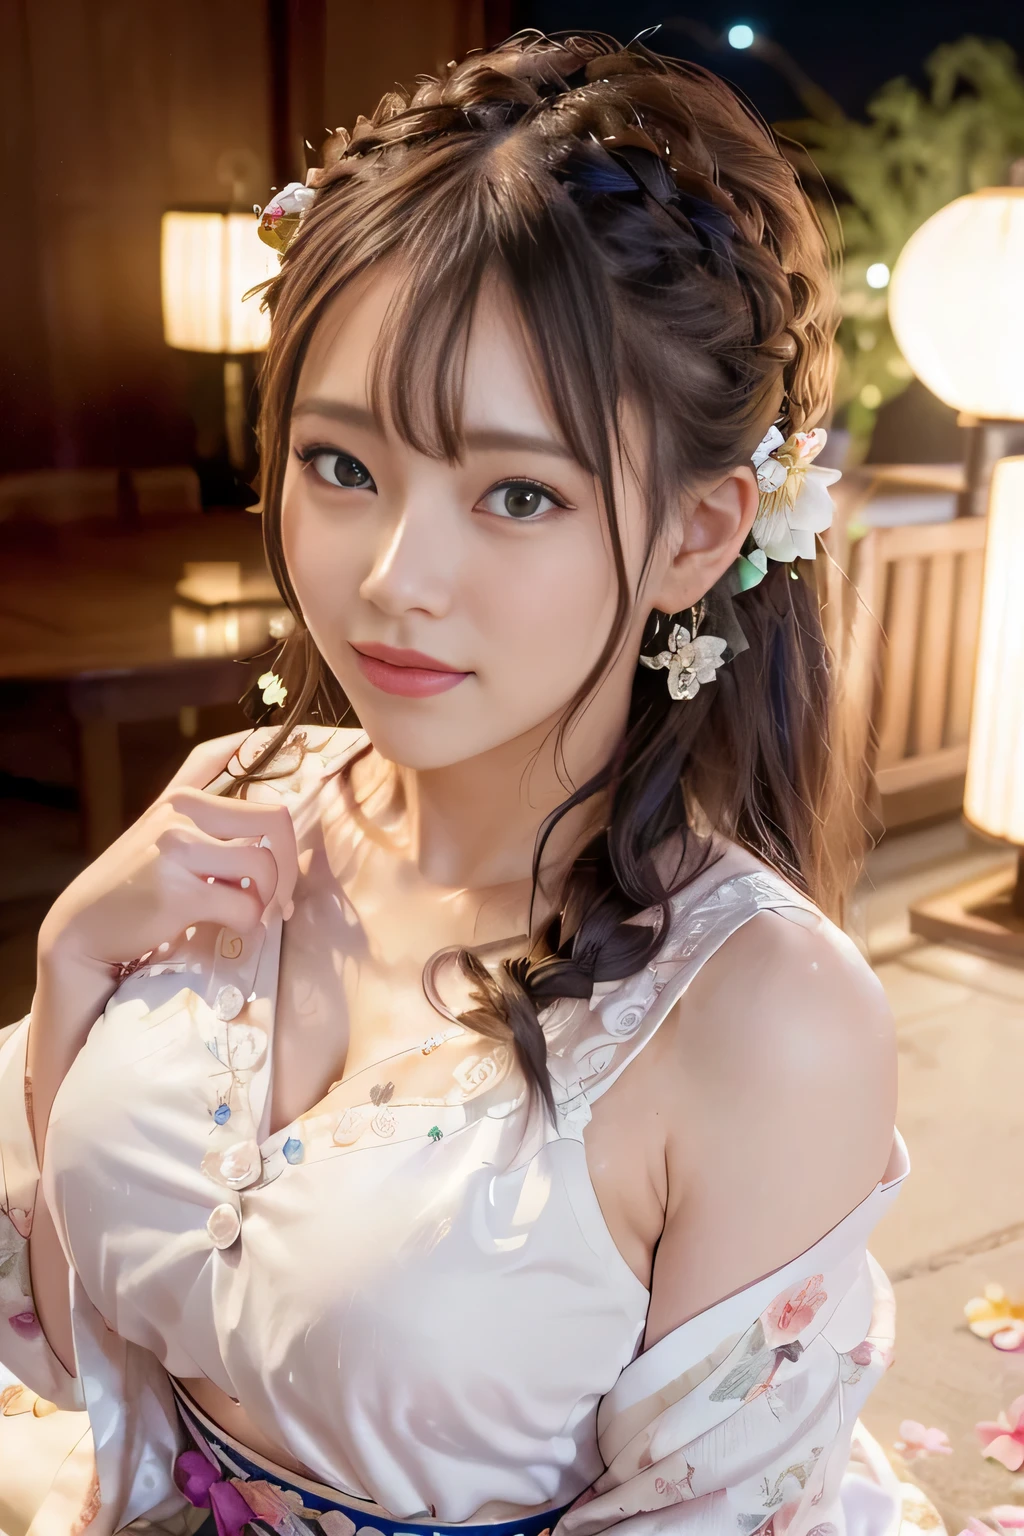 (beautiful mature adult woman),(flower hair ornament,floral braided top knot,twisted side part ponytail,floral braided headband,half up、floral braided space buns,voluminous fishtail braid,Twisted pan,),(The bangs are see-through bangs),very delicate and beautiful hair,(((emphasize the chest:1.3))),(dynamic angle),(dynamic and sexy pose),laughter、Looking back wearing a floral yukata isolated on white background、Fireworks being launched into the sky against the backdrop of the riverbank at night.、cute round face,,(table top,highest quality,Ultra high resolution output image,) ,(8K quality,),(sea art 2 mode.1),(Image mode Ultra HD,)